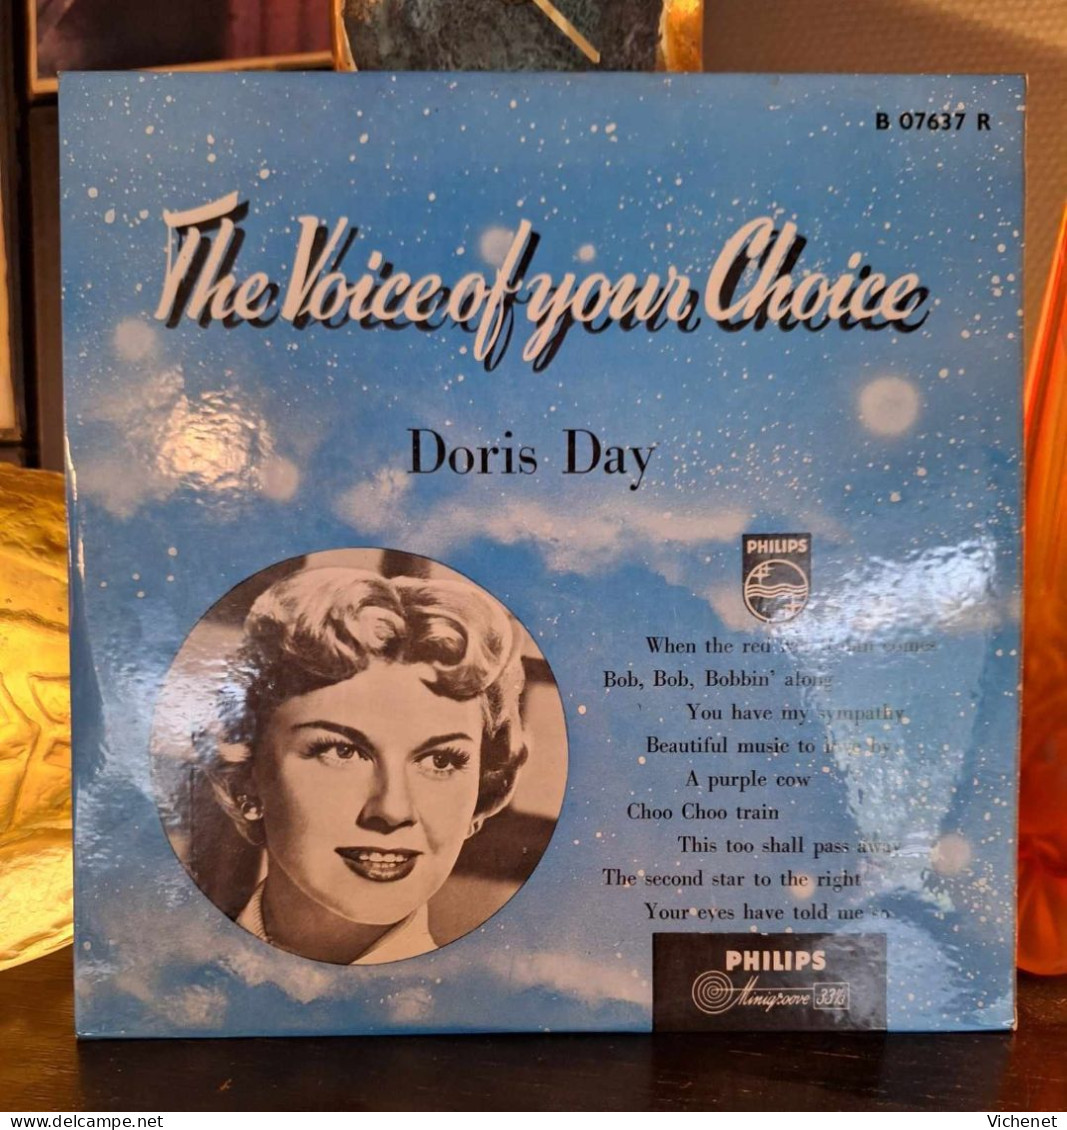 Doris Day - The Voice Of Your Choice - 25 Cm - Speciale Formaten